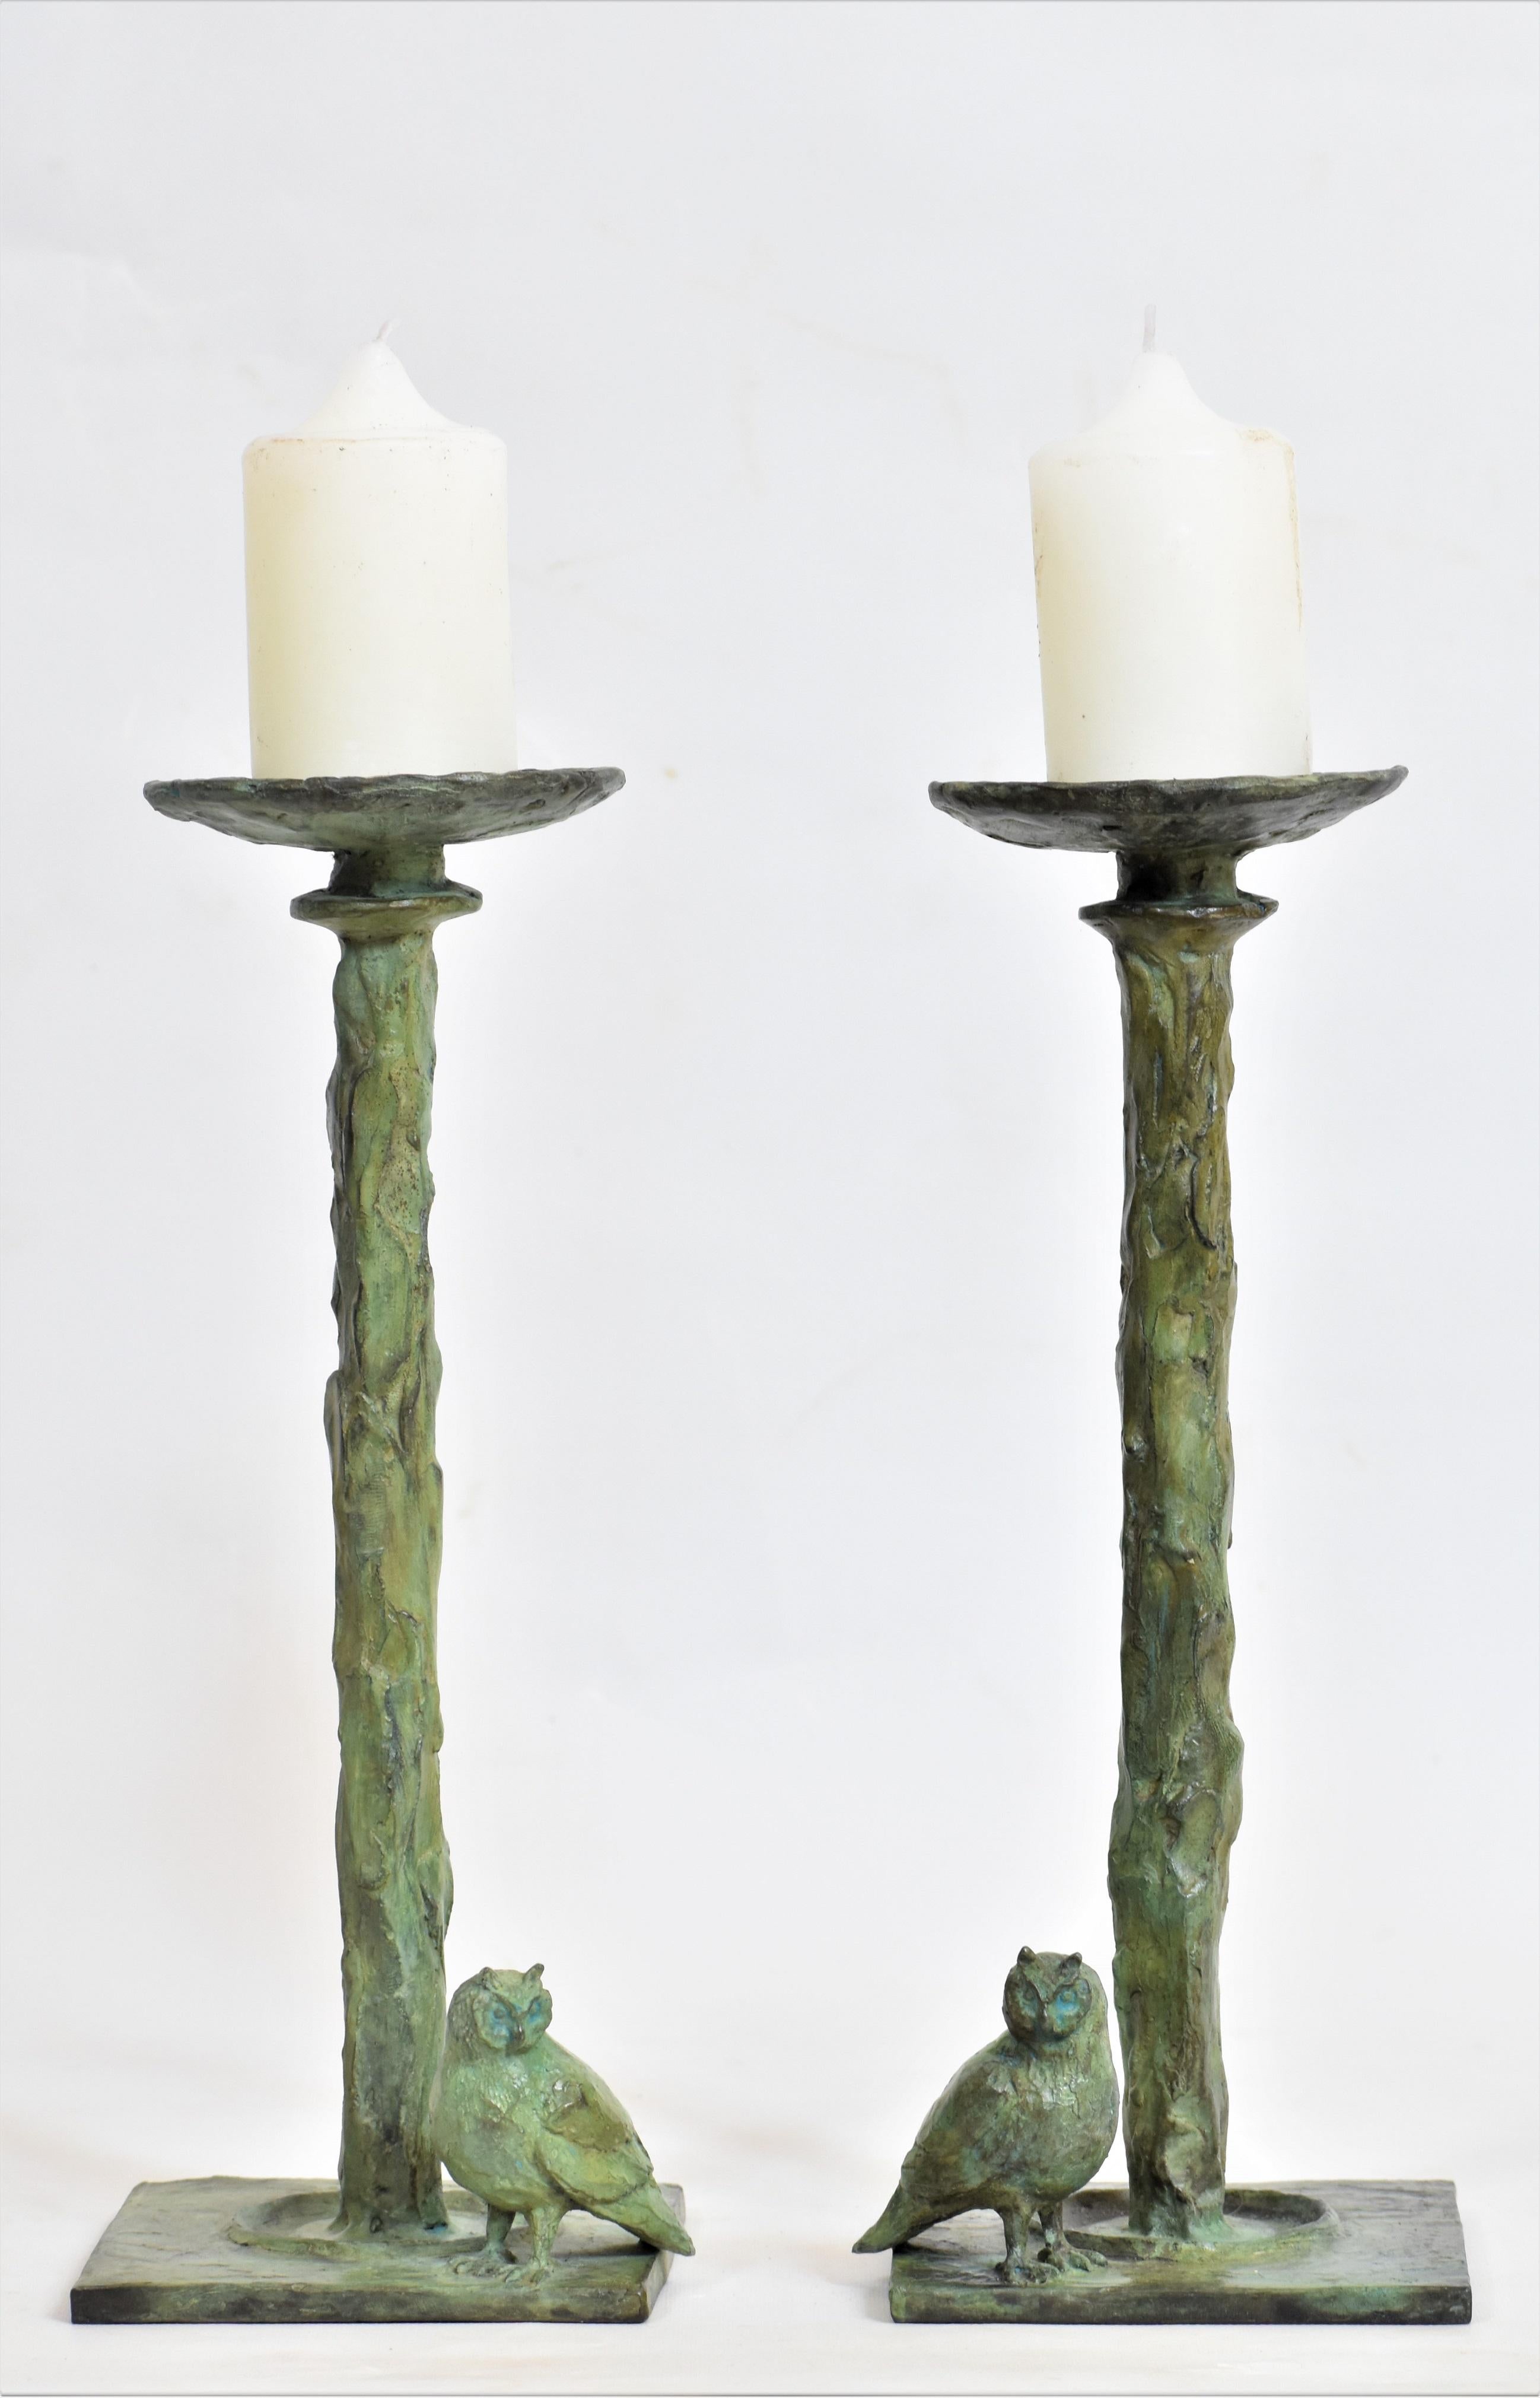 Owl Candlesticks in Bronze Verdigris, comes as a pair, each height 28 cm x 11 cm x 11 cm candlesticks in cast bronze with small bronze owl. Candles not provided.

Similar bronze single and double candle sticks in different sizes & motifs on